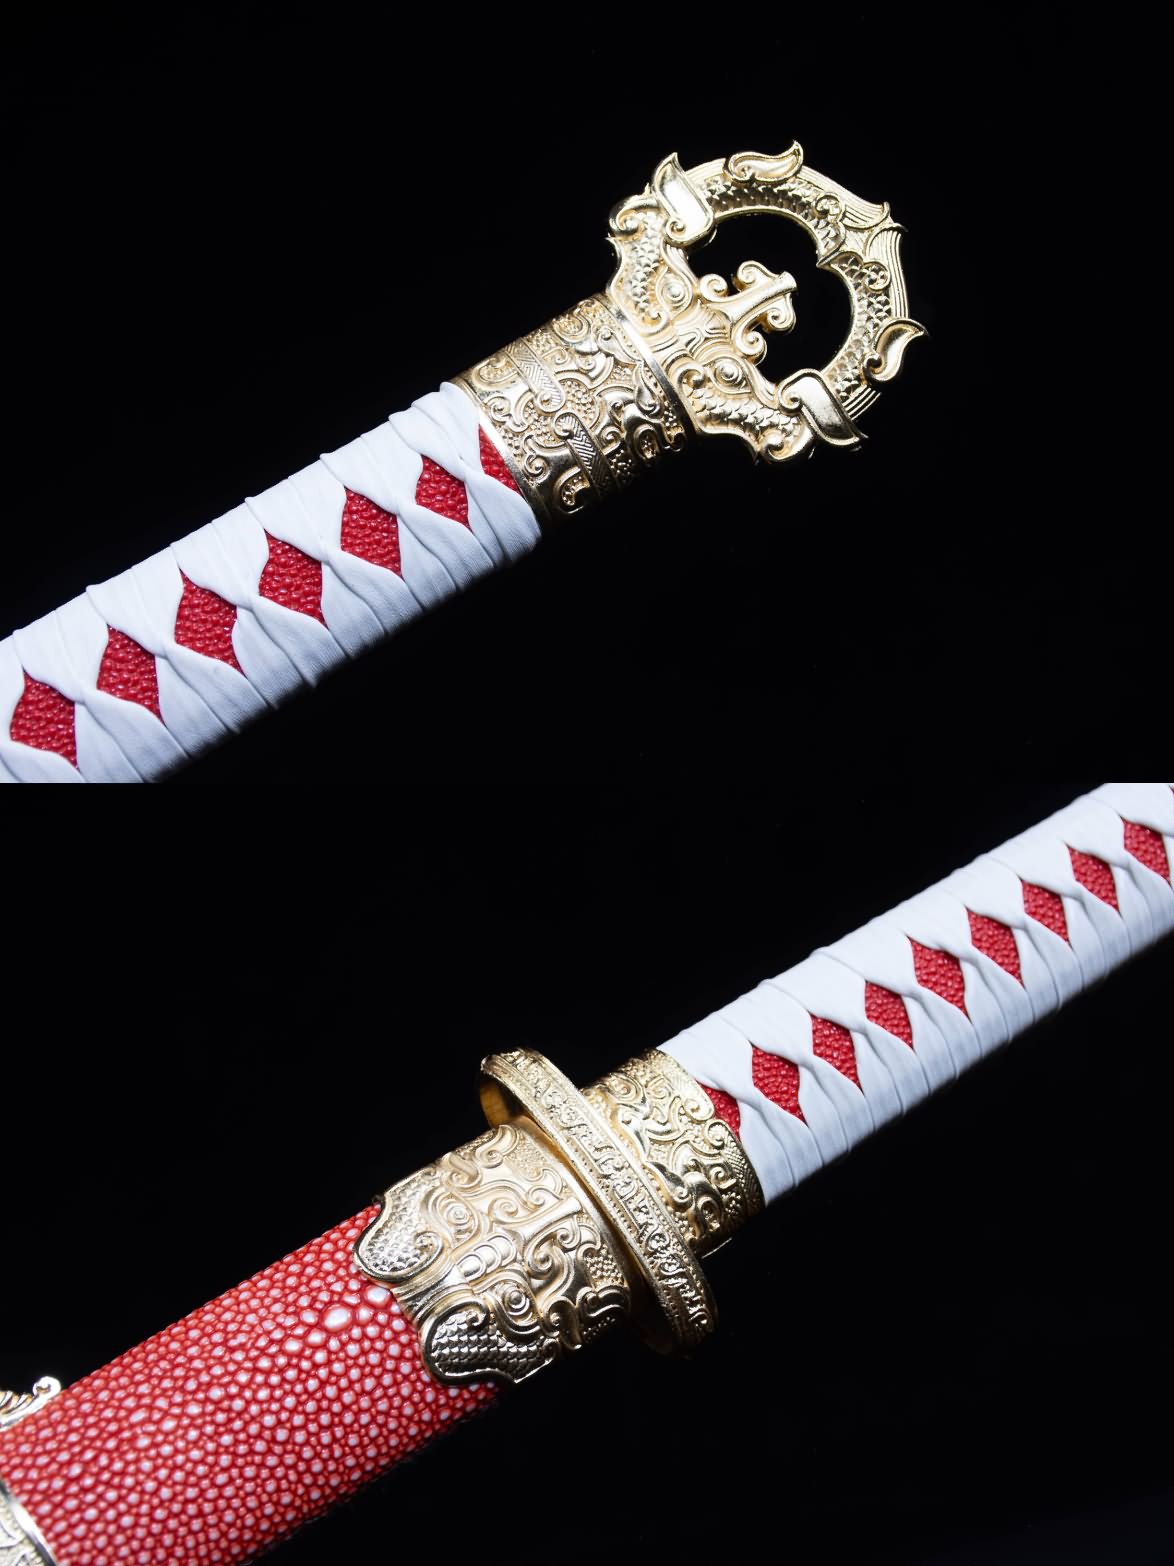 Round Head Tang jian,Battle Ready,Forged Blades,Red Fake Leather Scabbard